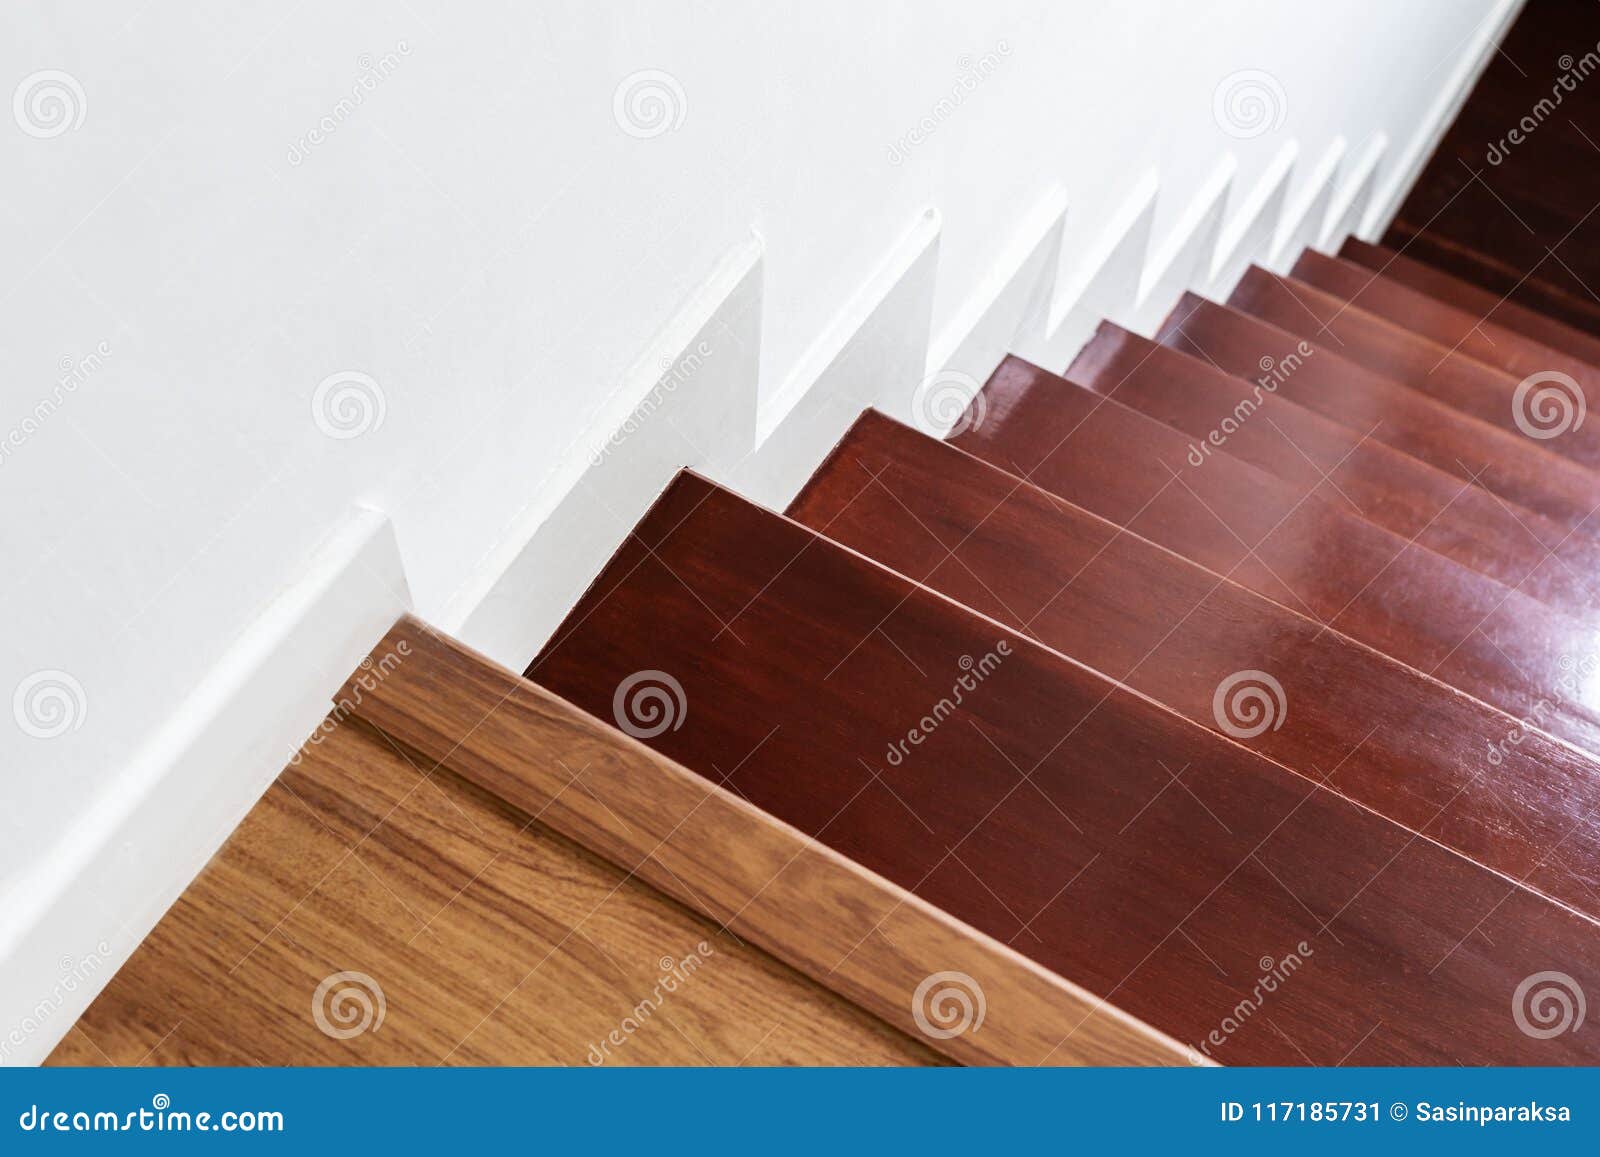 hardwood stair steps and white wall, interior stairs material and home 